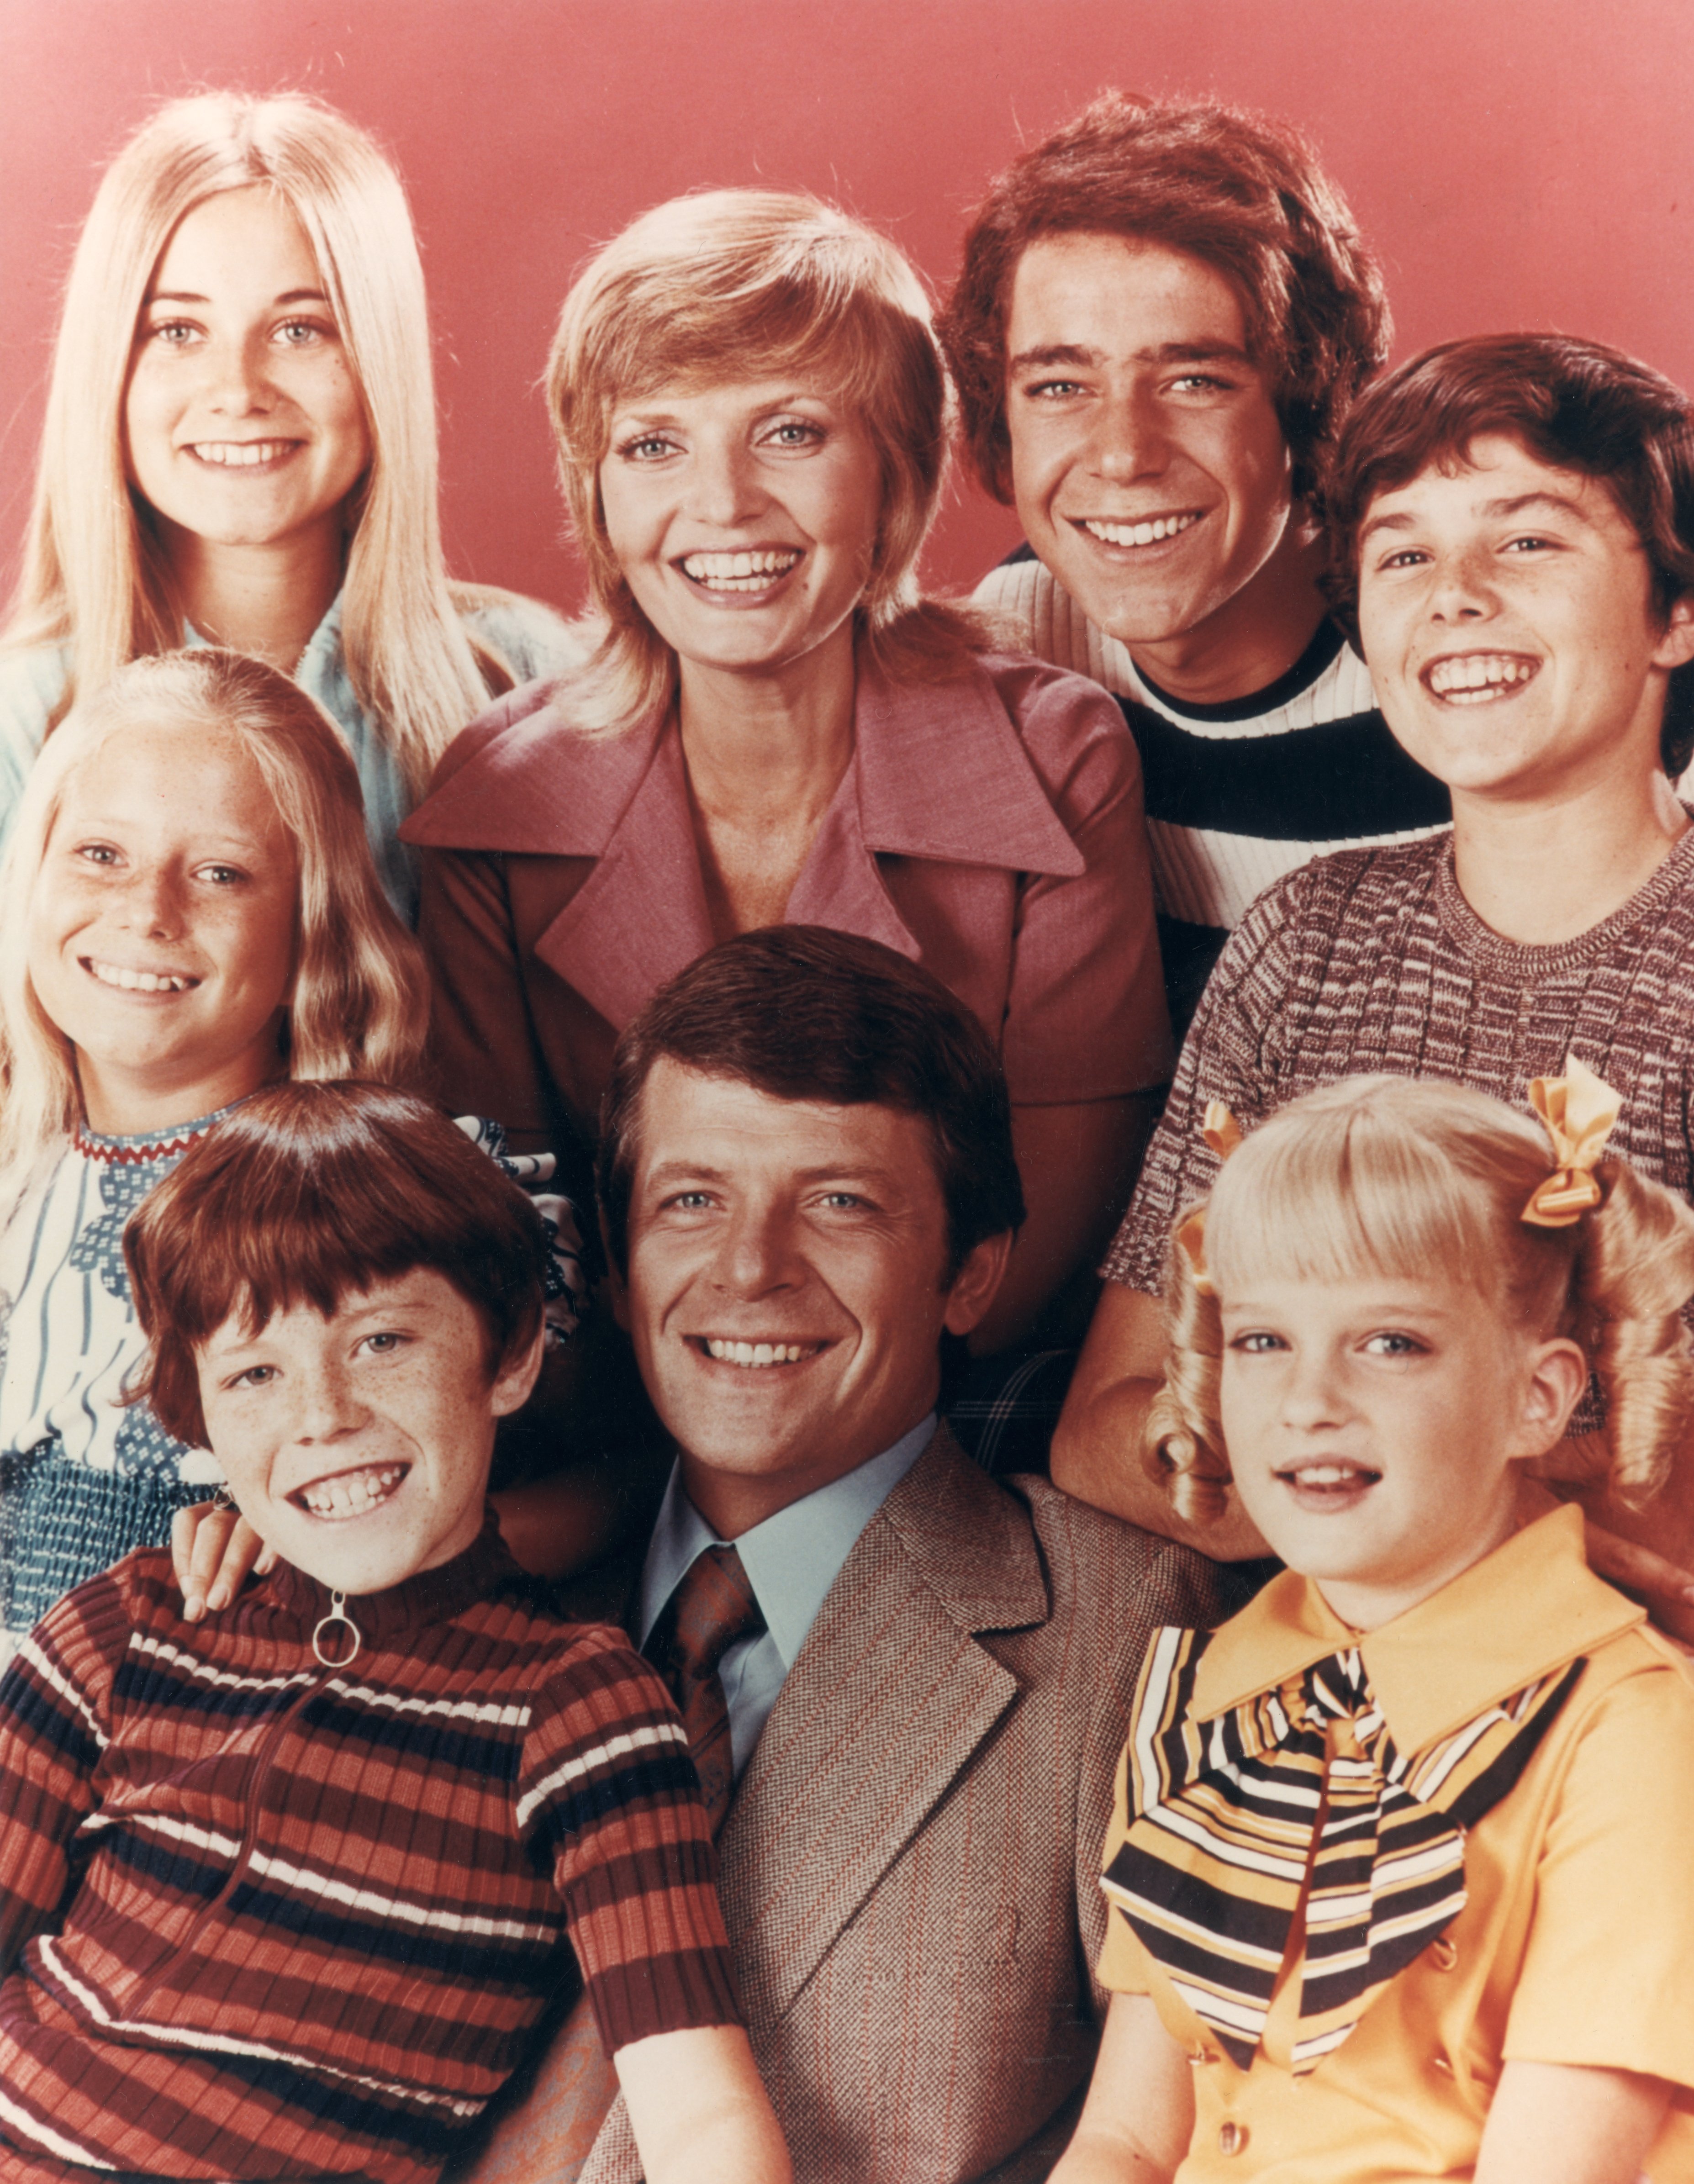 The Brady family, from the television series, 'The Brady Bunch'. Top row (left to right) Maureen McCormick, Florence Henderson, Barry Williams, Christopher Knight; bottom row: Eve Plumb, Mike Lookinland, Robert Reed and Susan Olsen | Photo: Getty Images